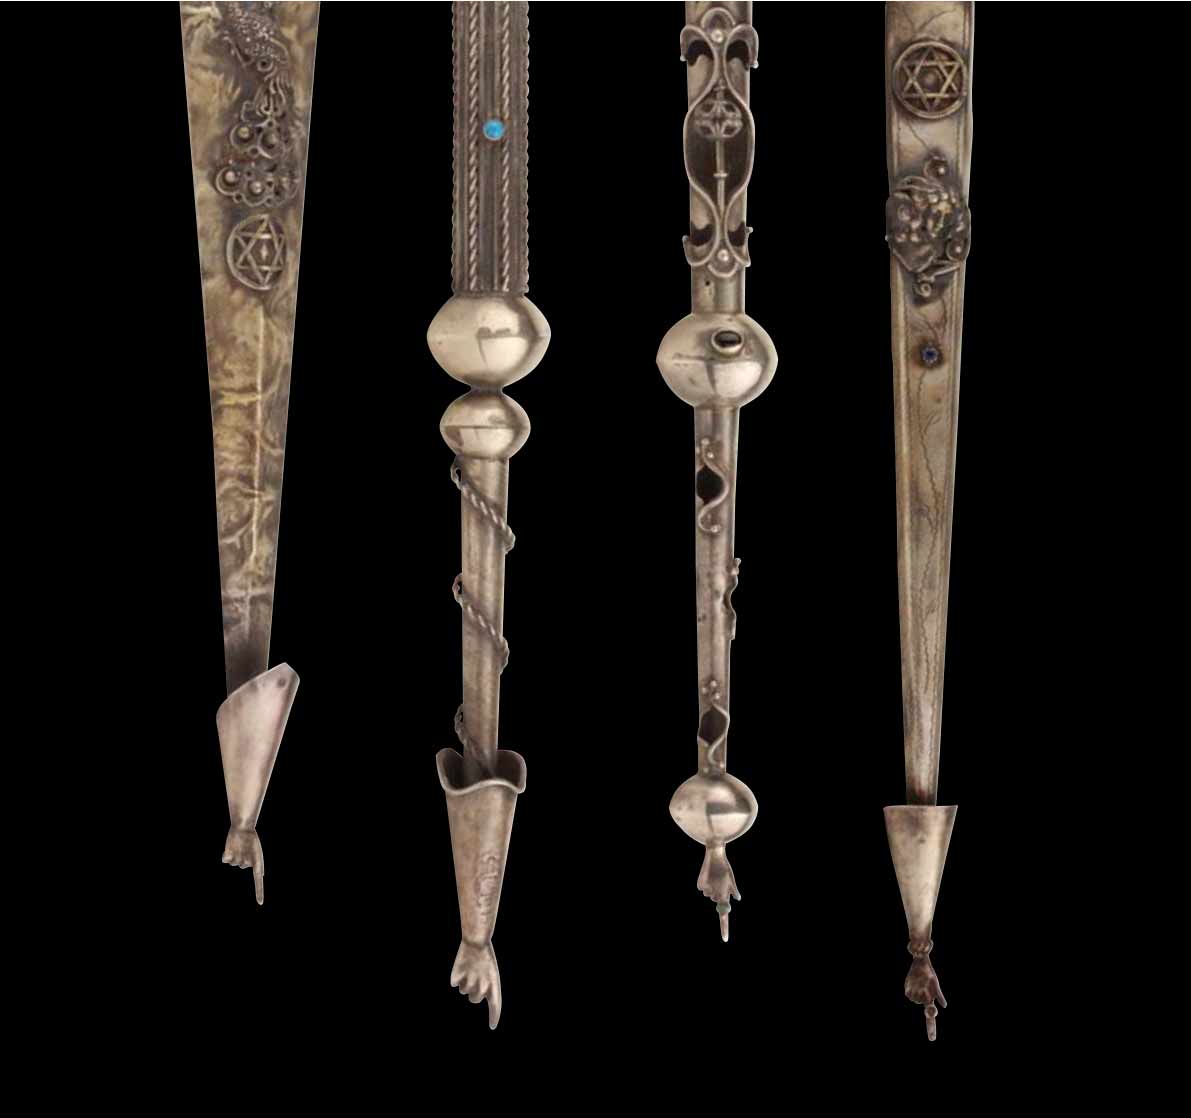 A collection of Torah pointers